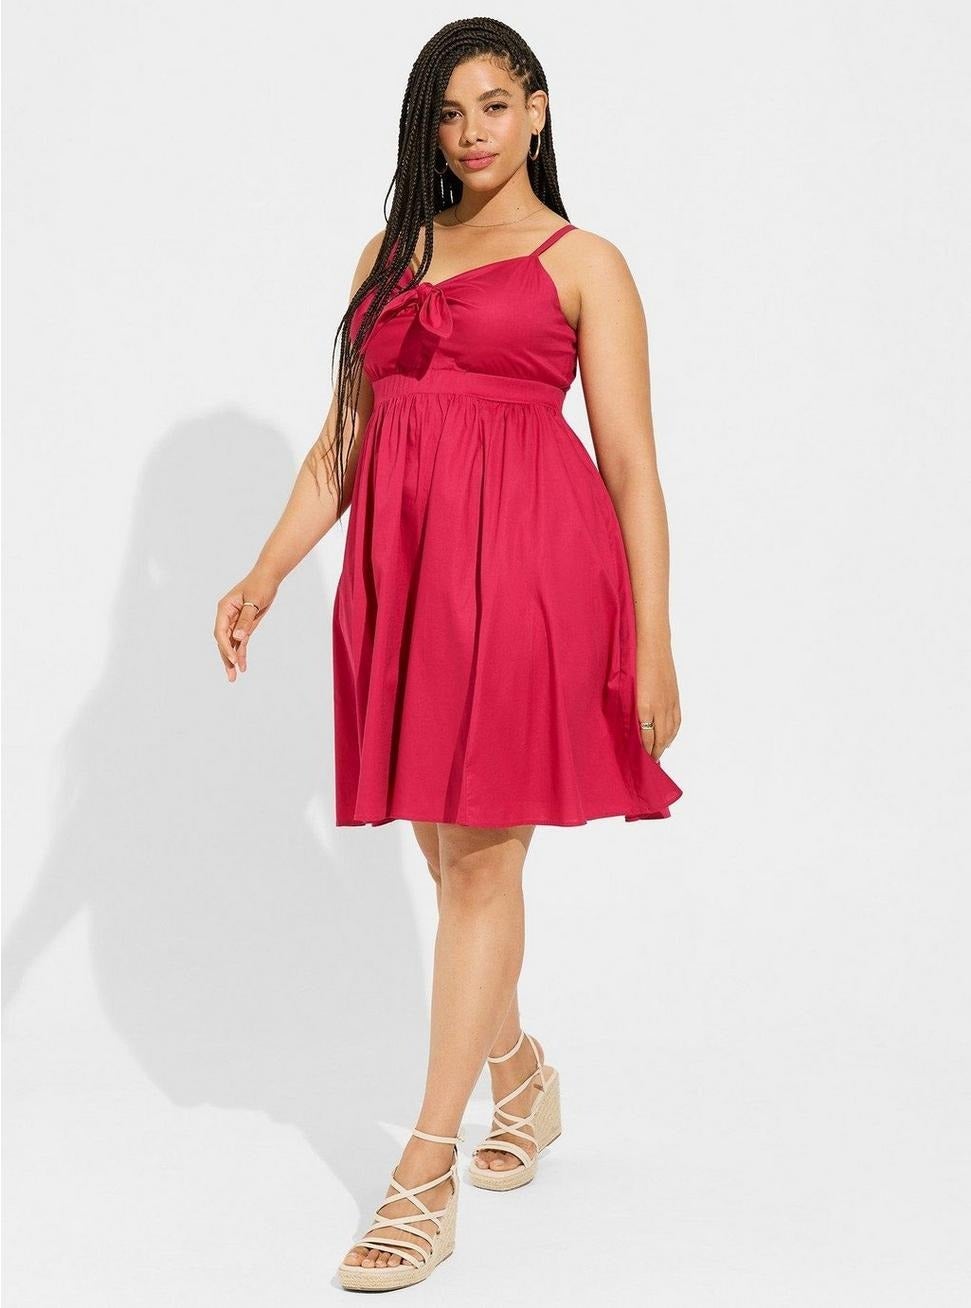 Cool Summer Dresses To make You Mimic that Gorgeous Diva Look - Hike n Dip   Casual summer dresses sundresses, Summer dresses, Summer dresses  sundresses